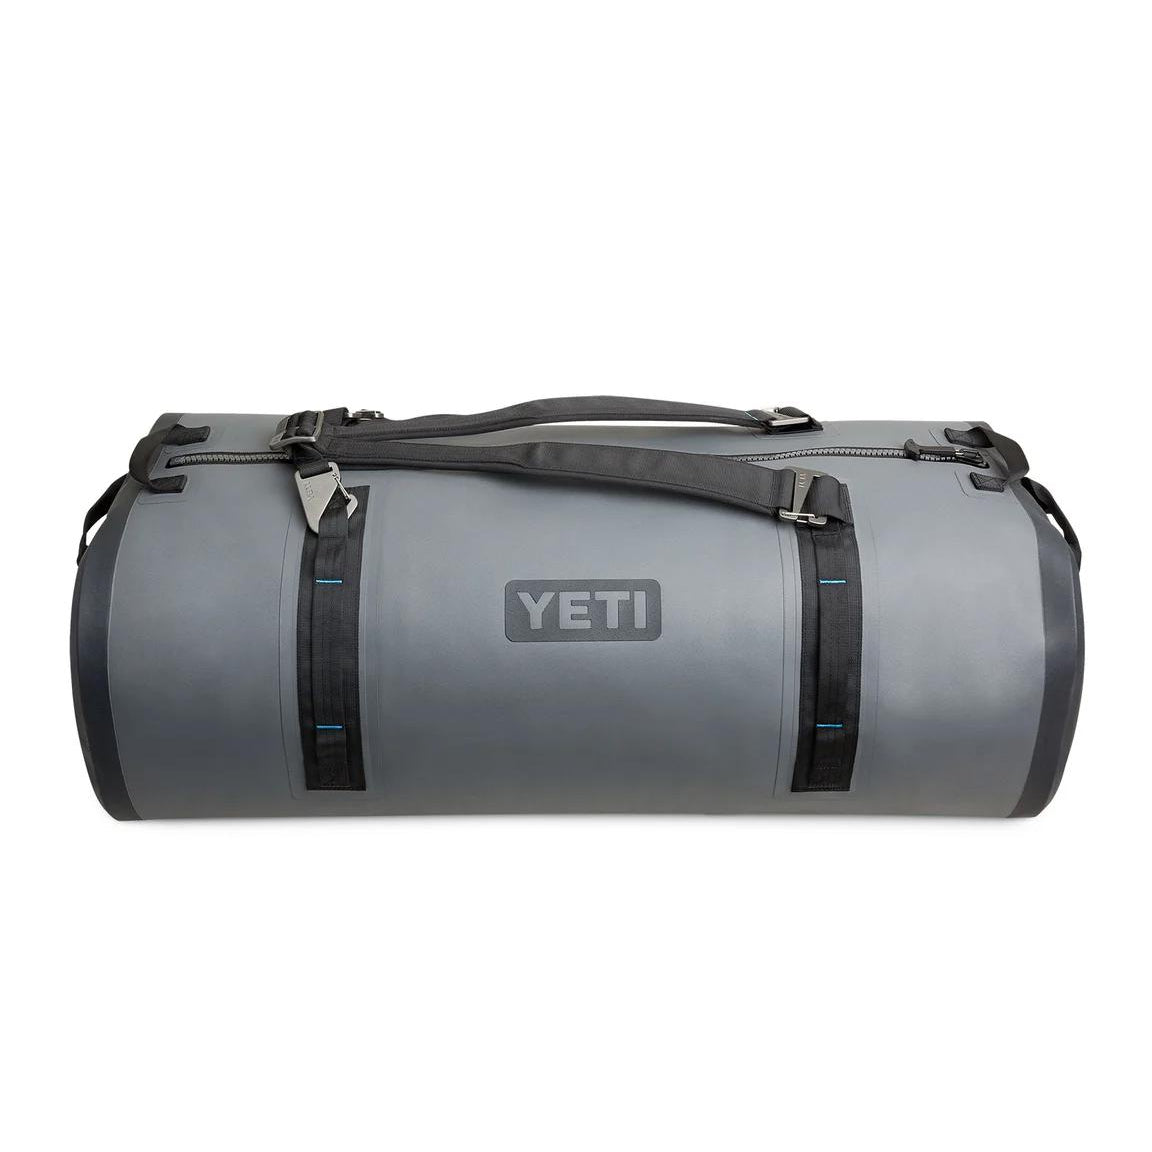 Yeti Panga 100 Submersible Duffle Bag-HUNTING/OUTDOORS-Kevin's Fine Outdoor Gear & Apparel